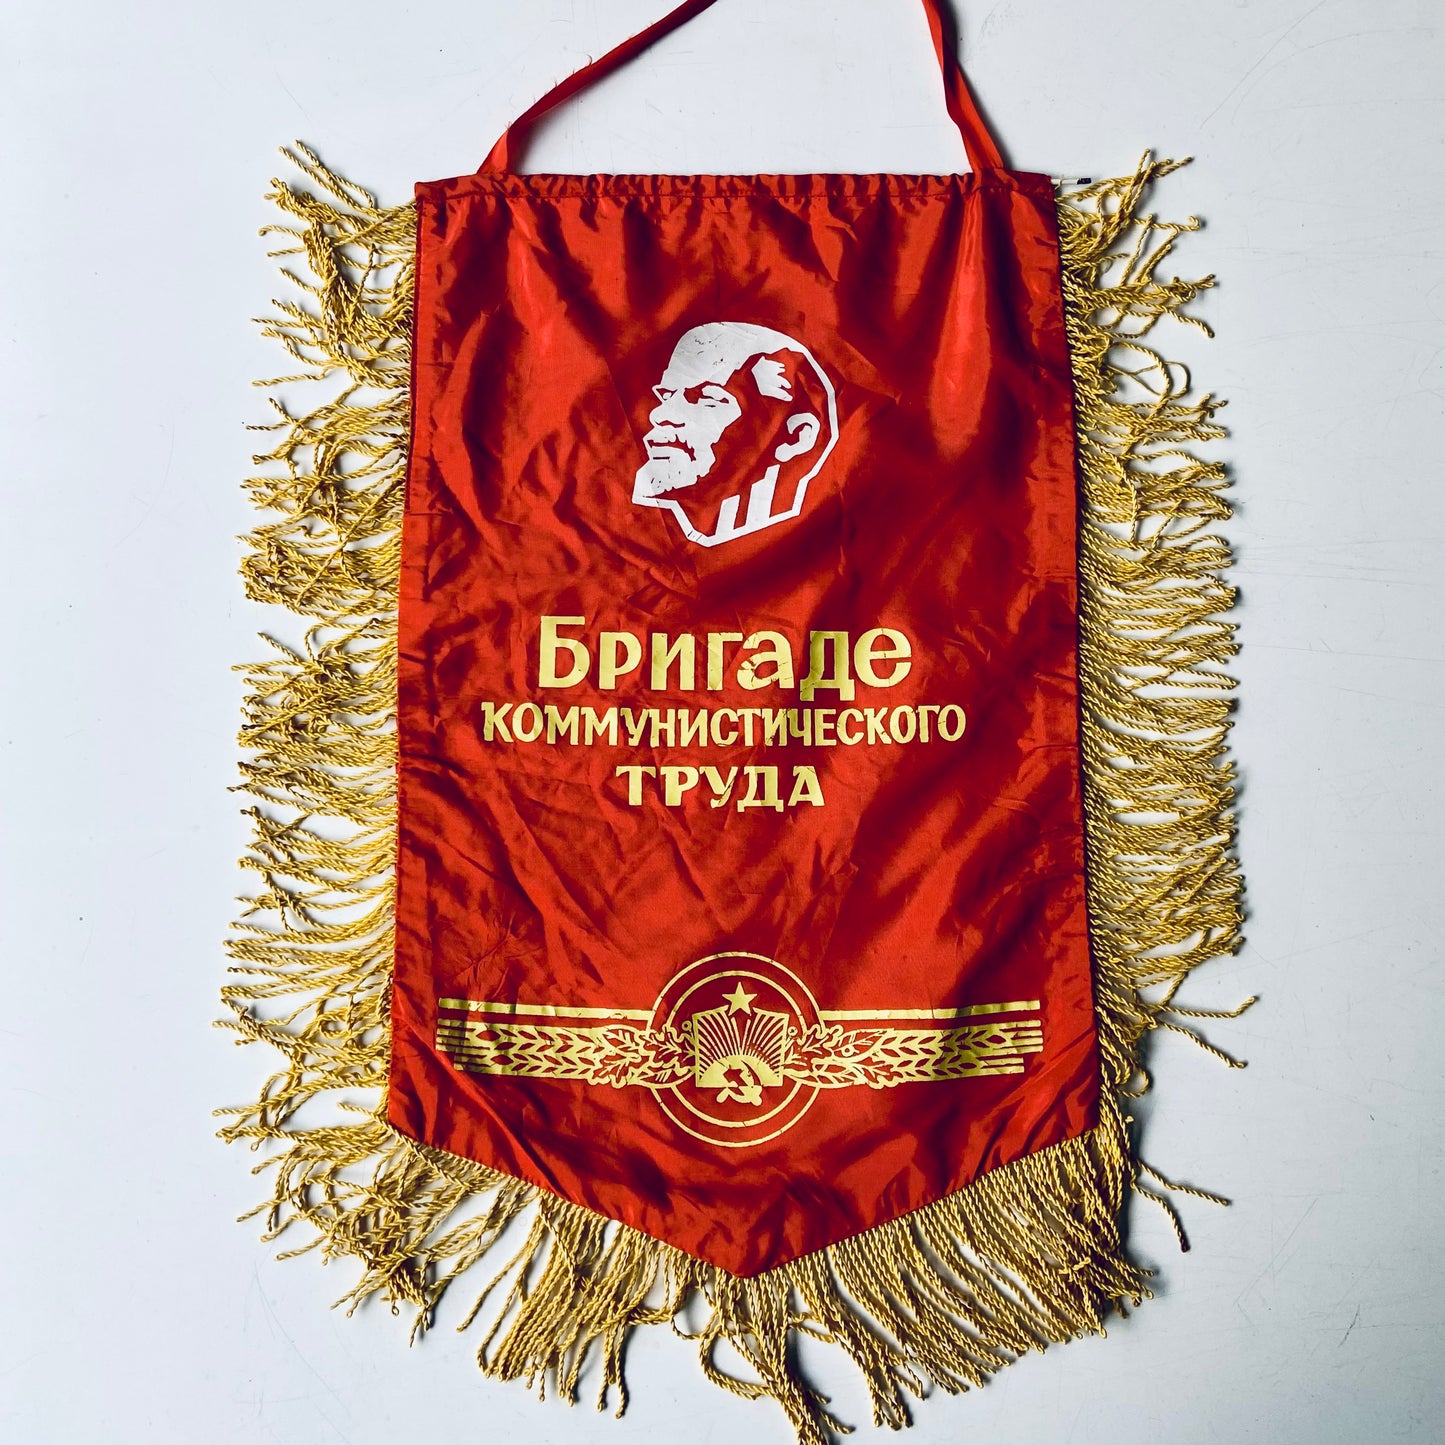 Pennant of the Communist Brigade of Labor, USSR, 1970s